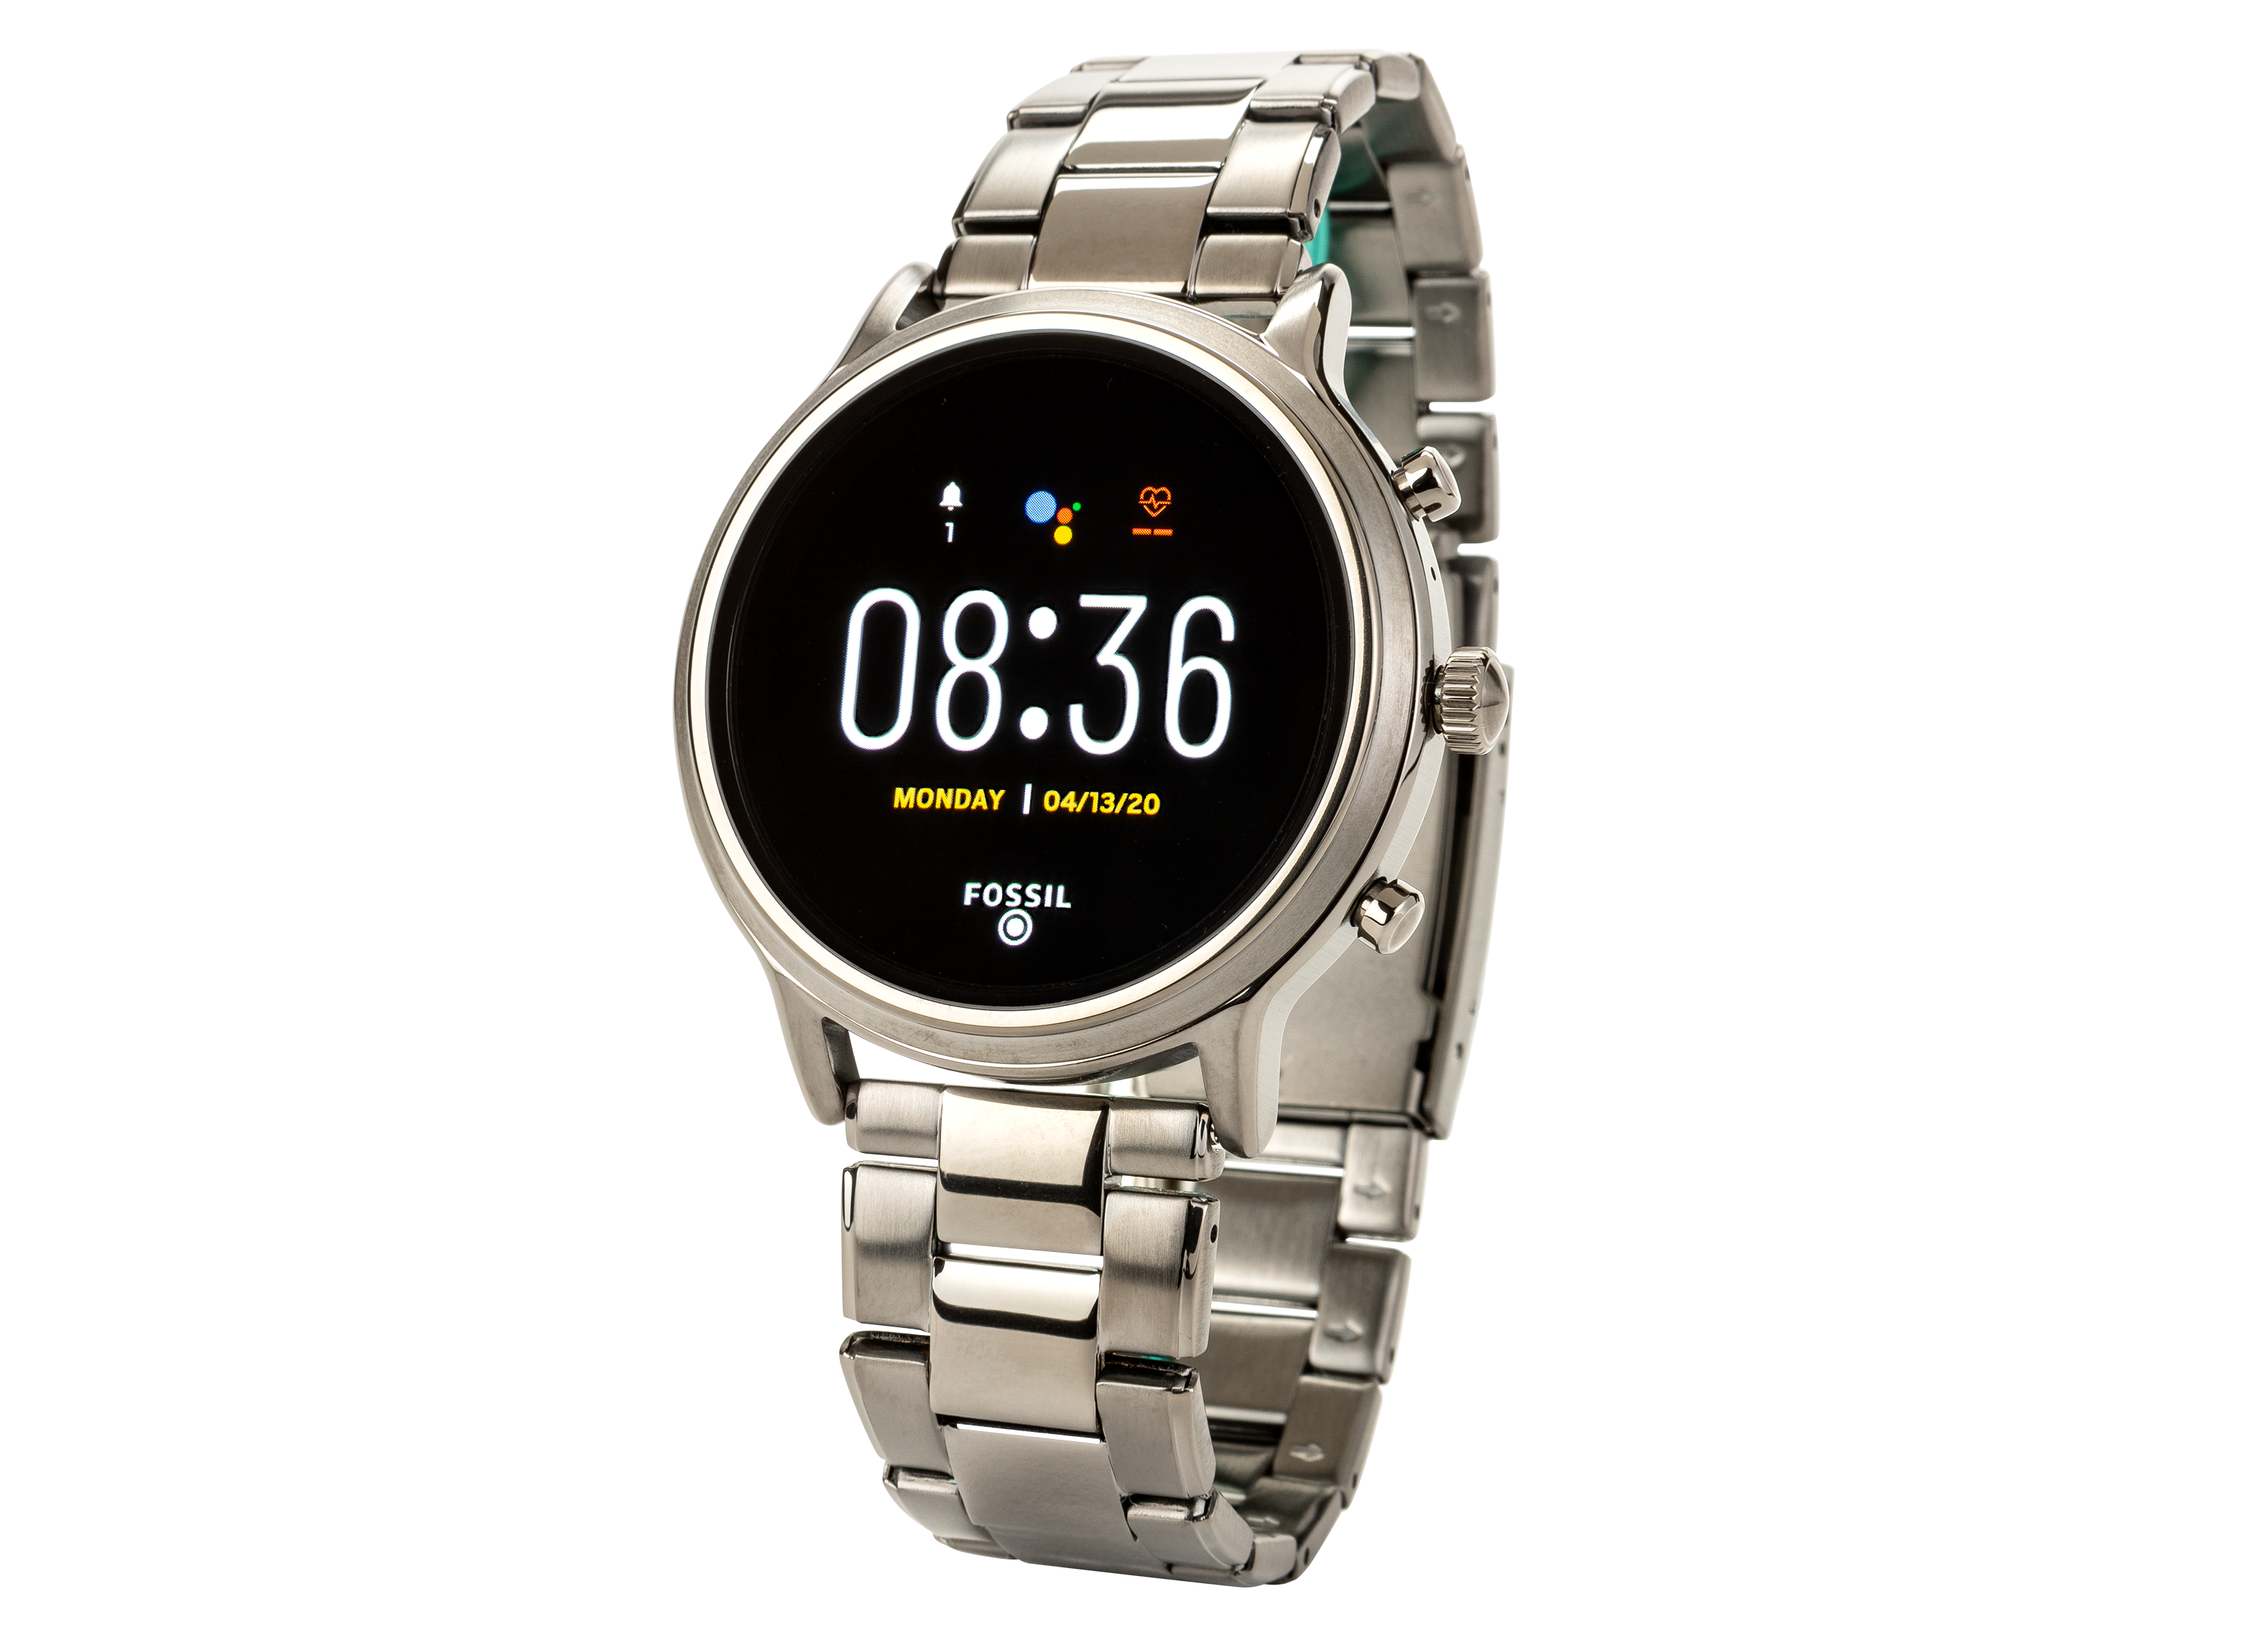 Fossil Carlyle HR Gen 5 Review - Consumer Reports